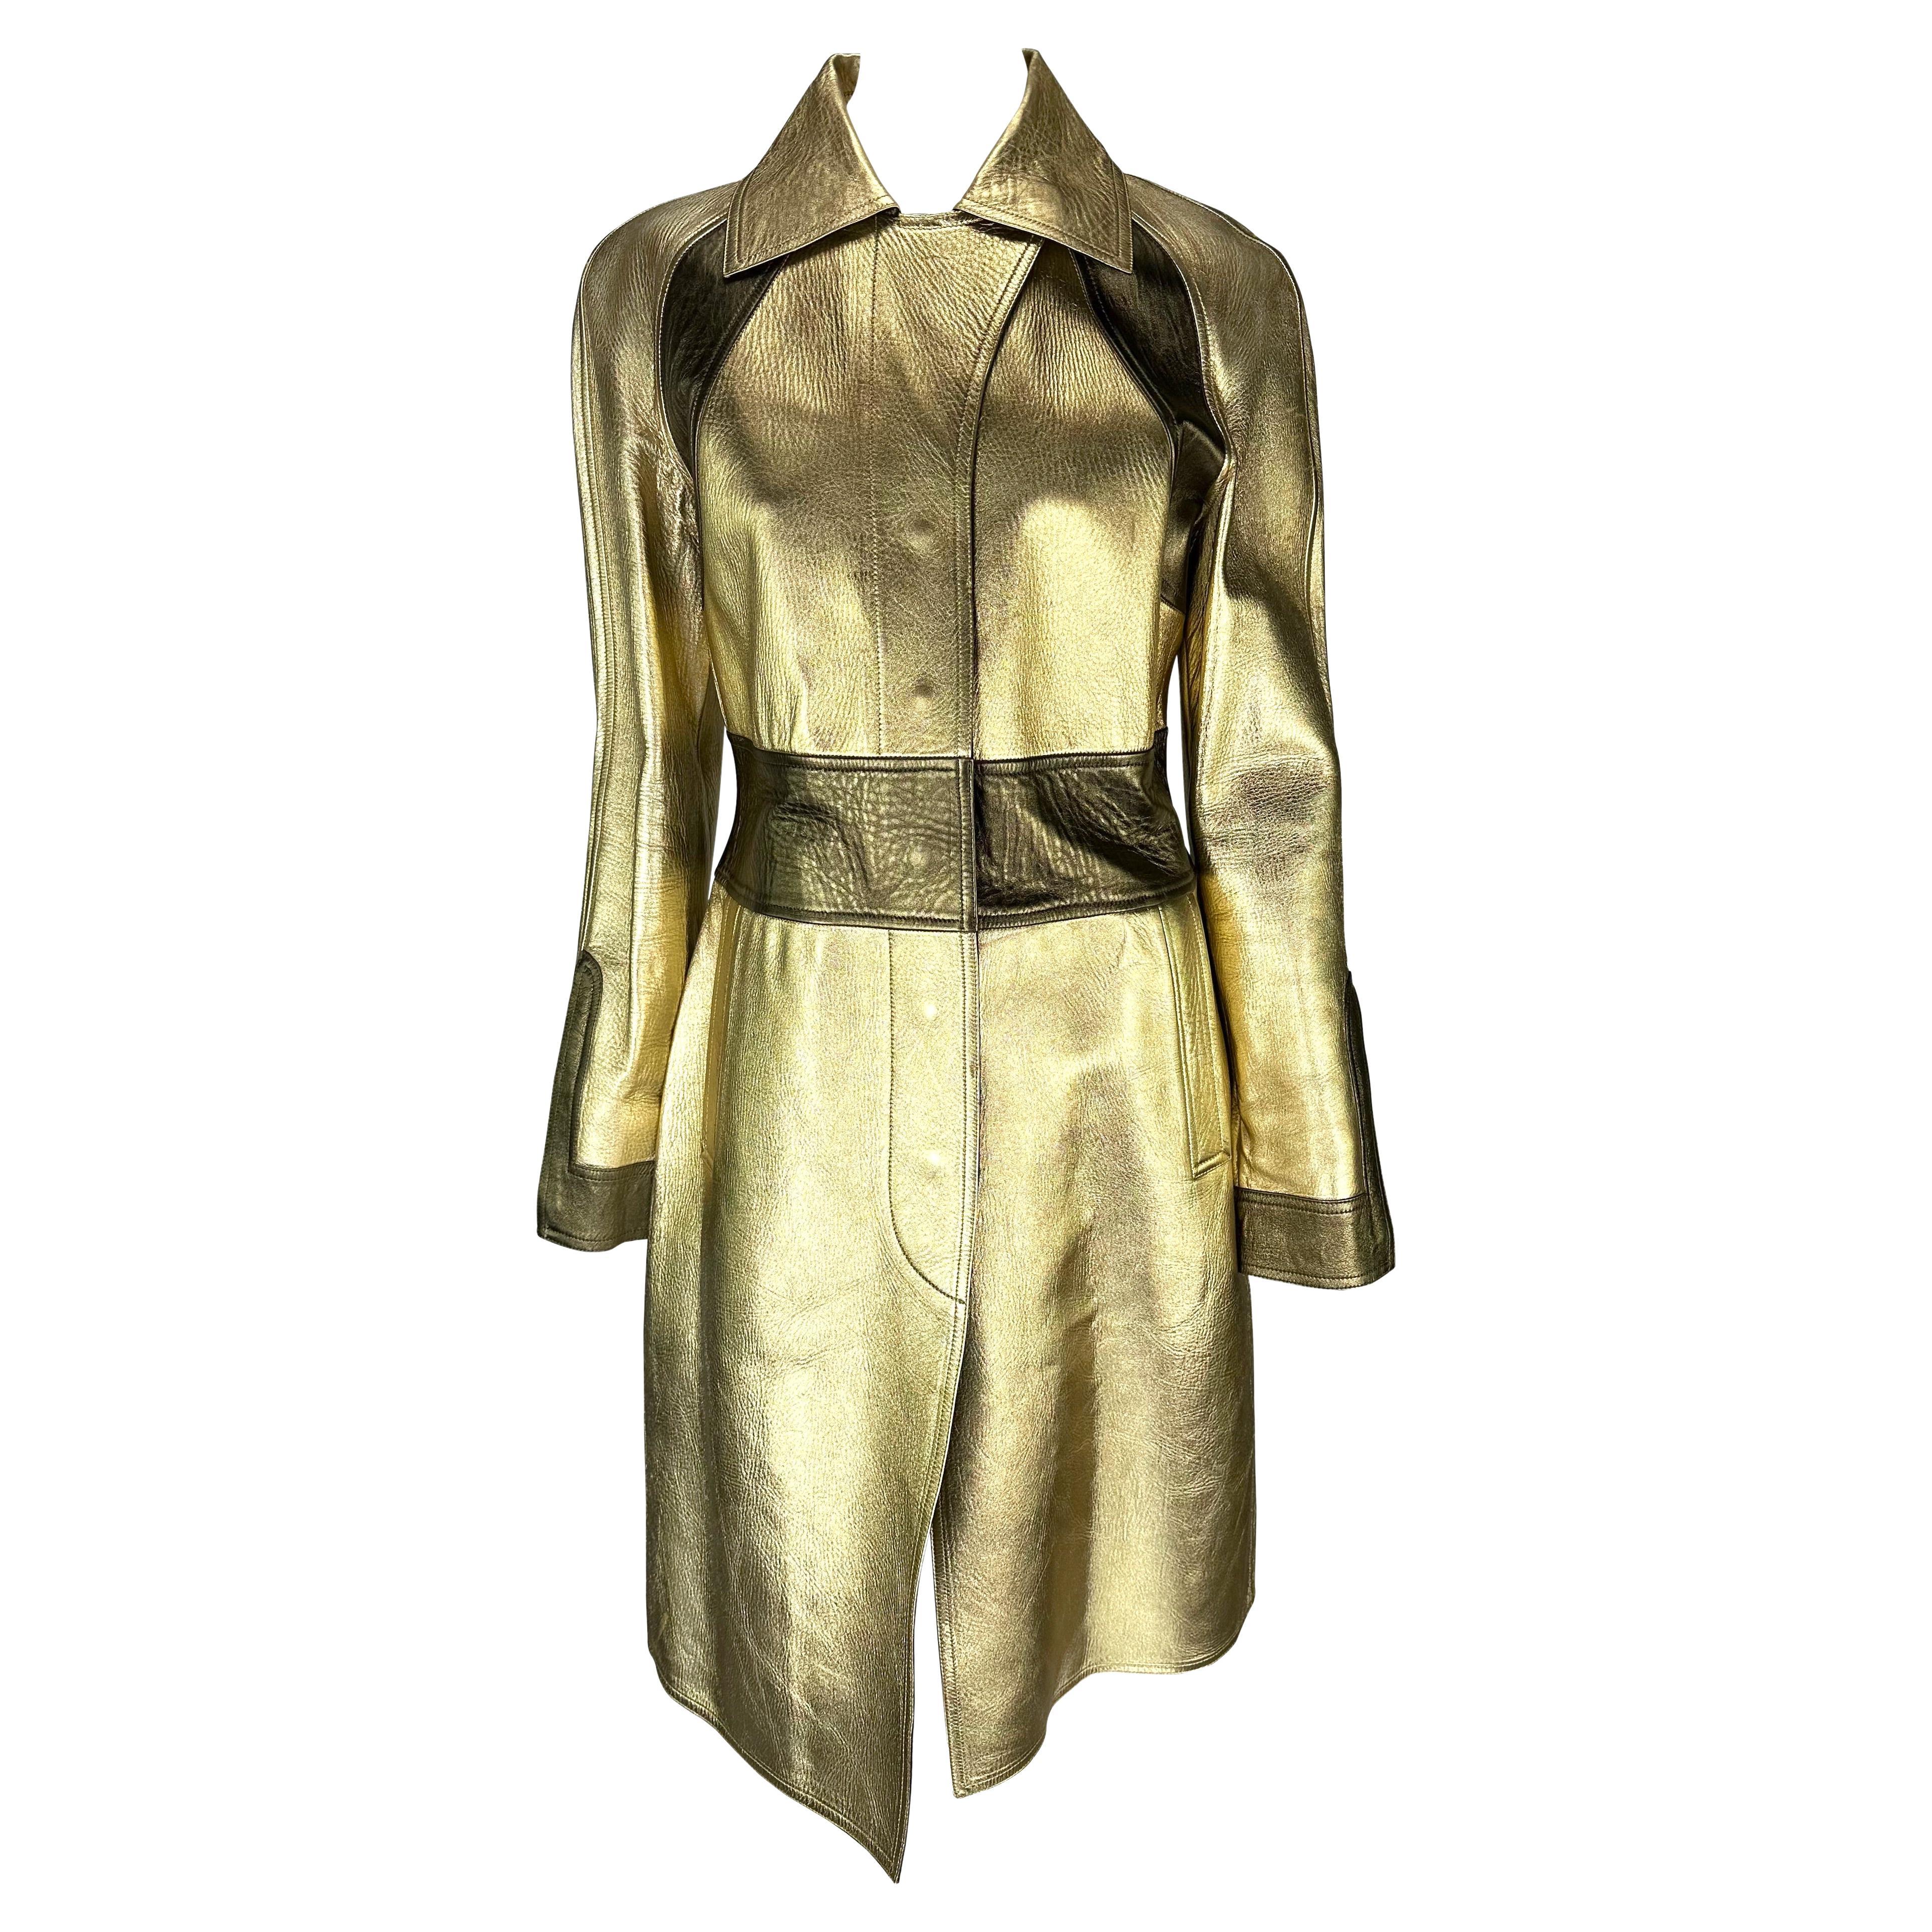 F/W 2000 Gucci by Tom Ford Runway Ad Two-Tone Gold Metallic Leather Coat